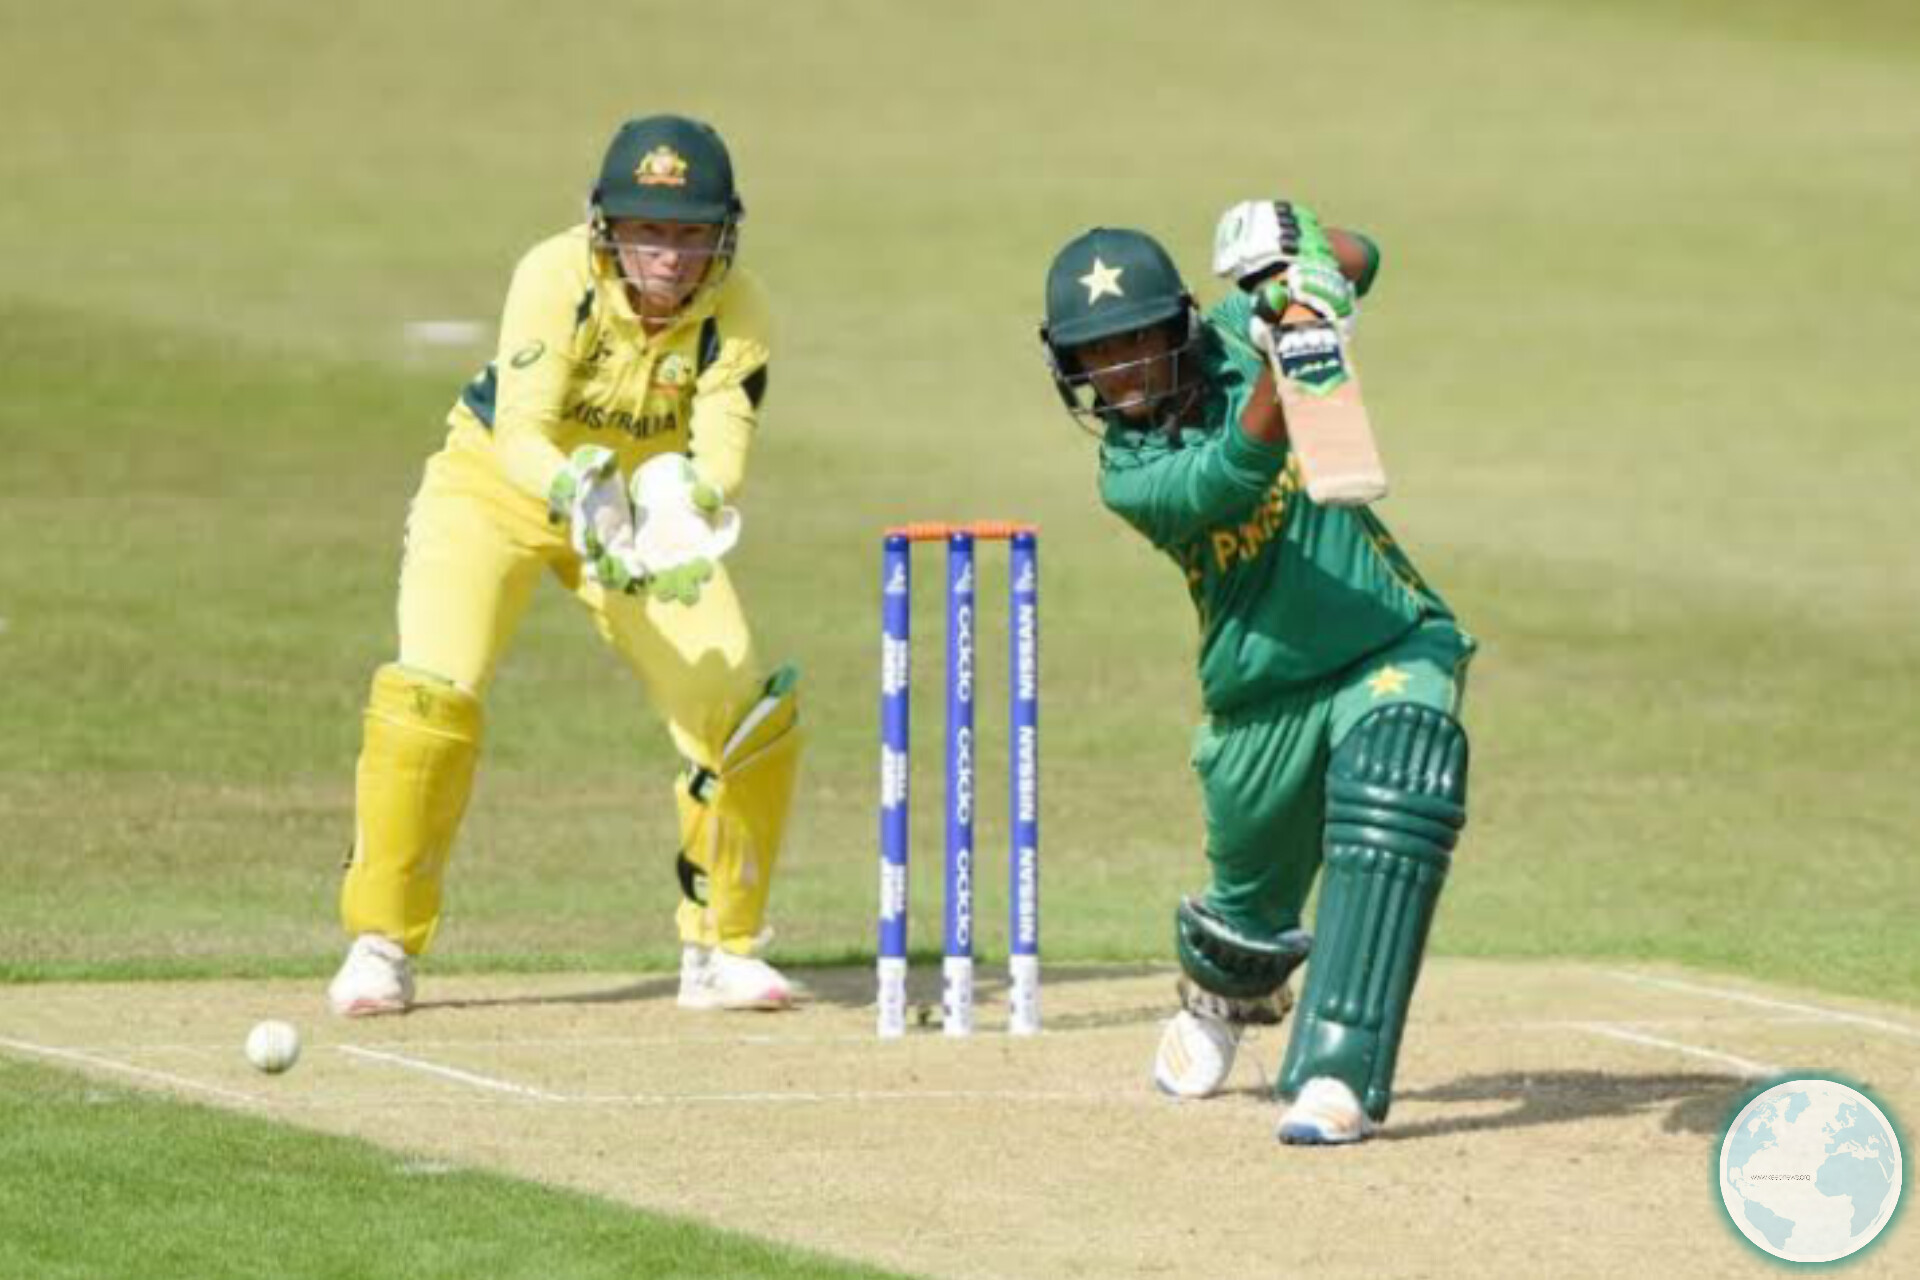 1st ODI between PAK vs AUS Women's Team Continues, Match is Limited to 40 Overs